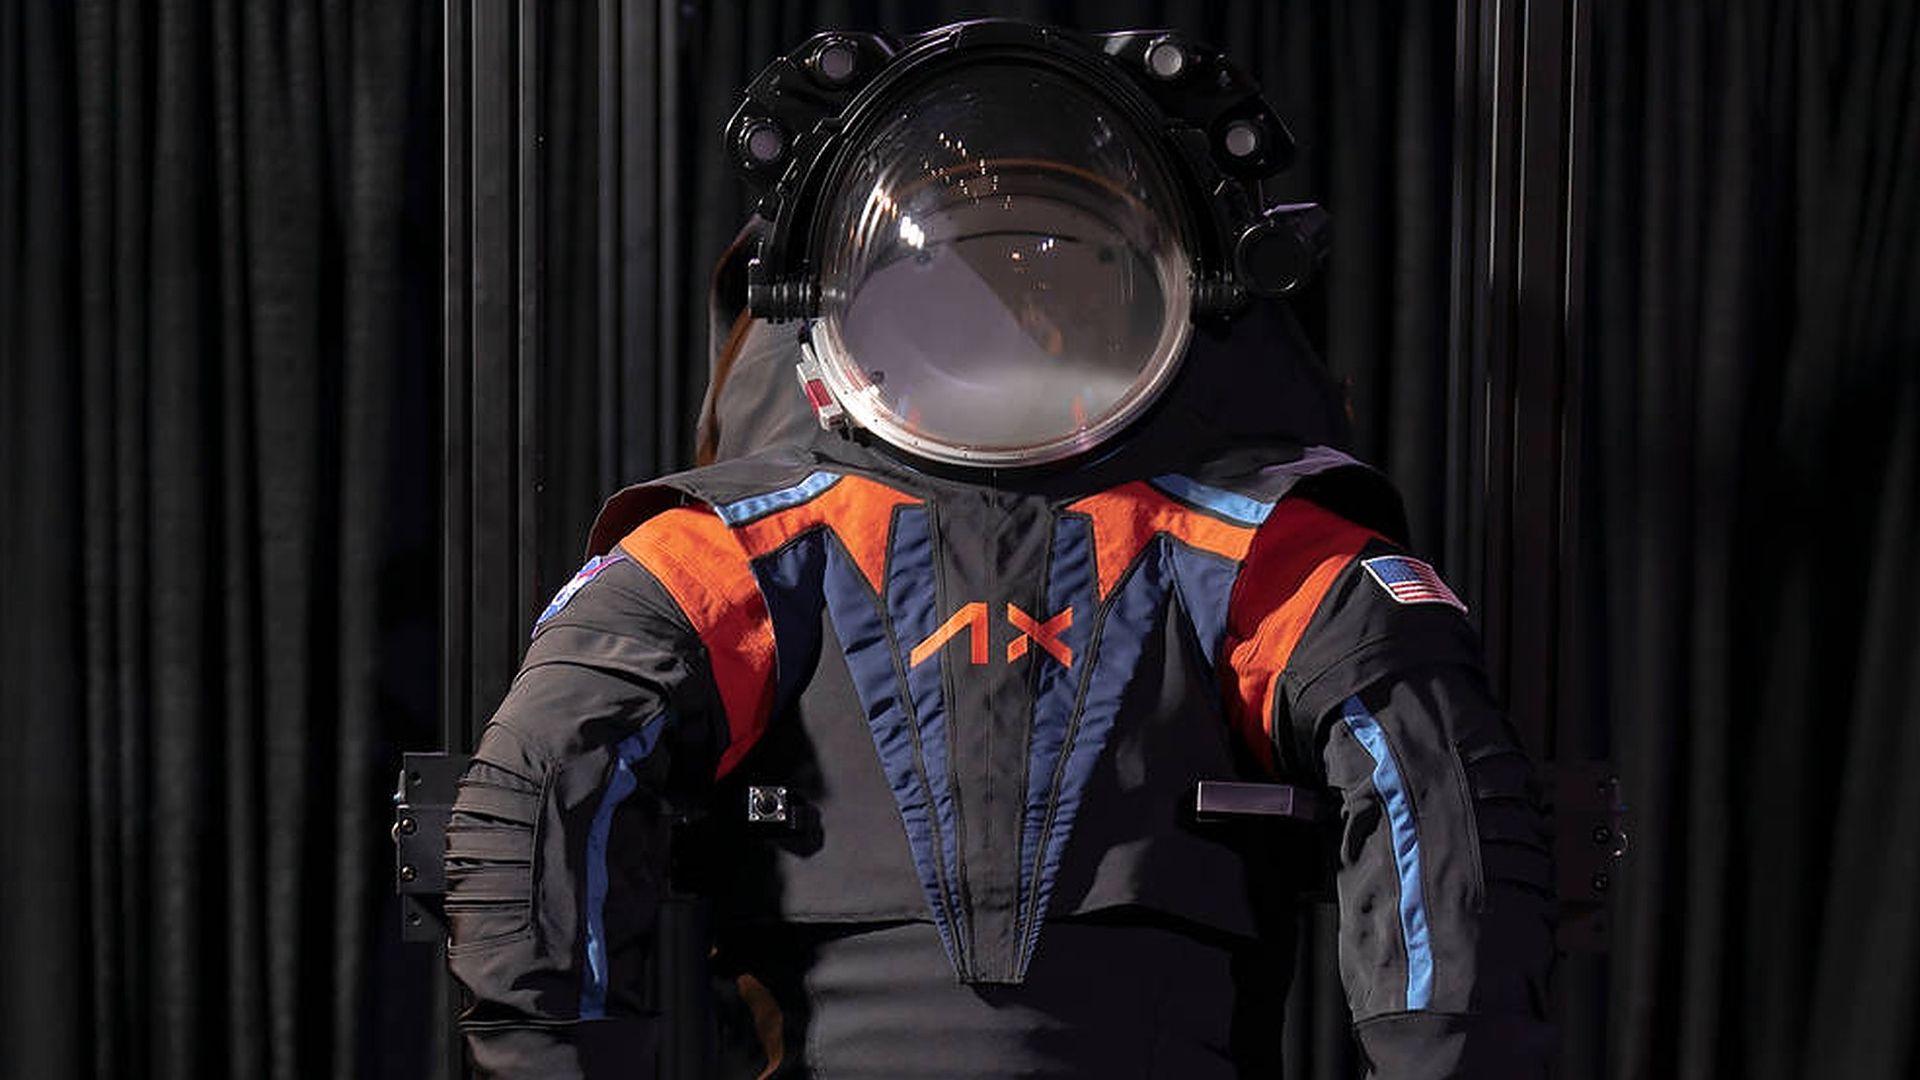 An image of the new NASA spacesuit  to be worn astronauts on the planned Artemis 3 moon mission later this decade.